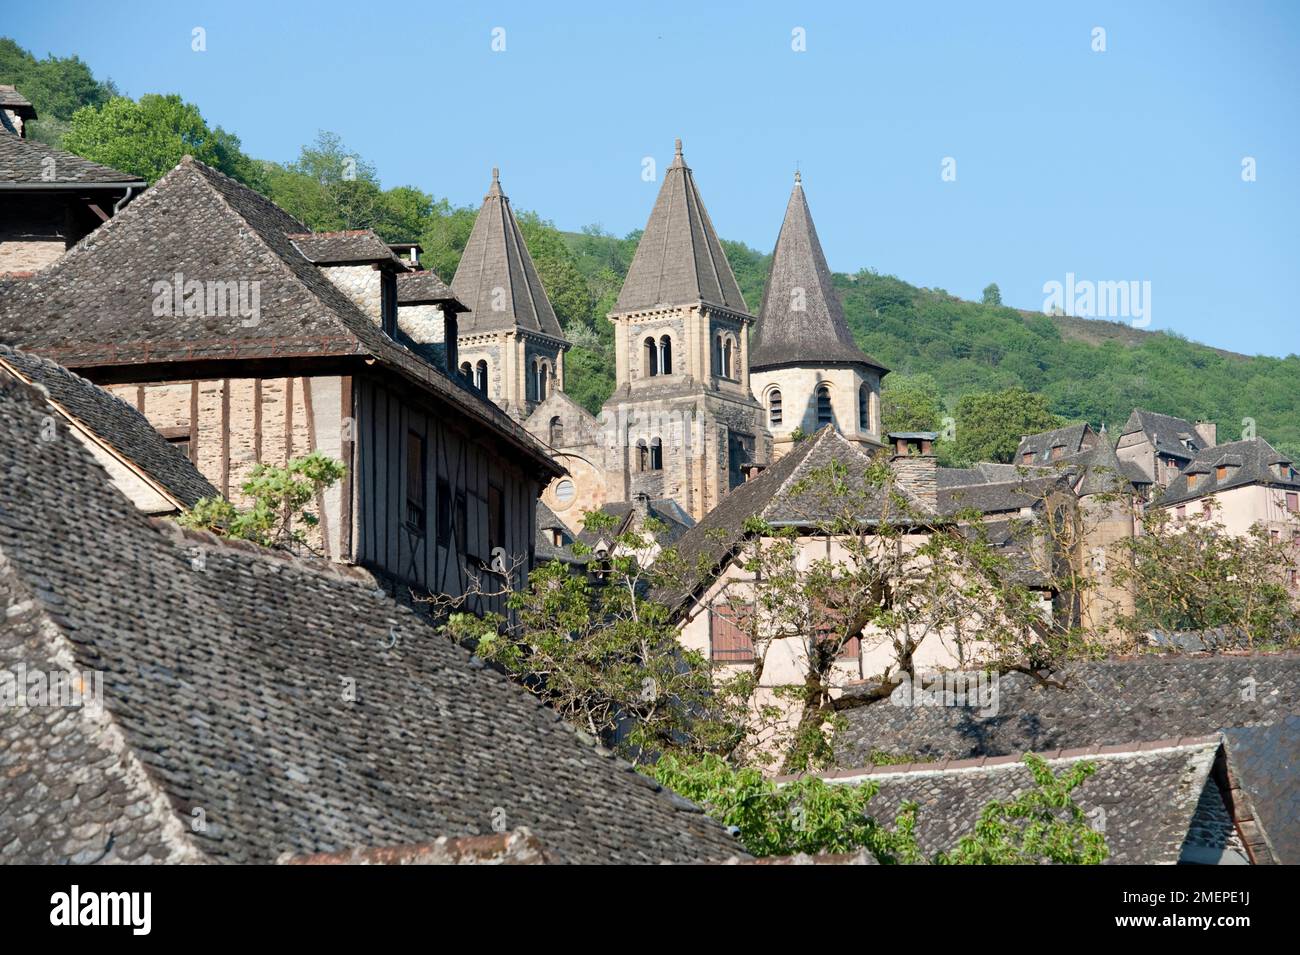 France, Midi-Pyrenees, Aveyron, Conques, view of medieval village and Abbey Church of Saint Foy Stock Photo